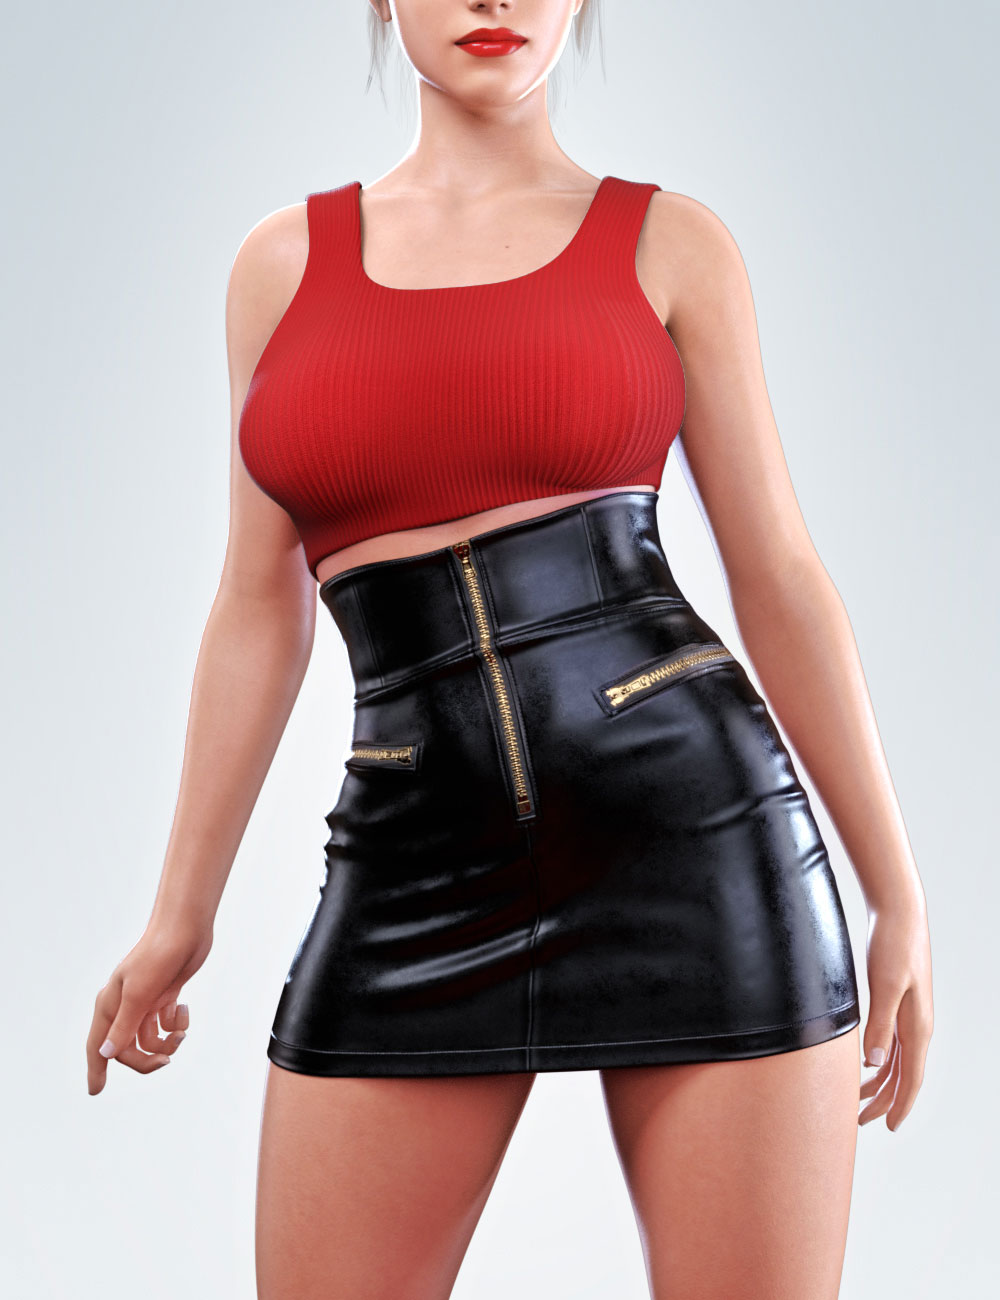 dForce COG Crop Top With Leather Skirt for Genesis 8 and 8.1 Females by: CatOnGlade, 3D Models by Daz 3D